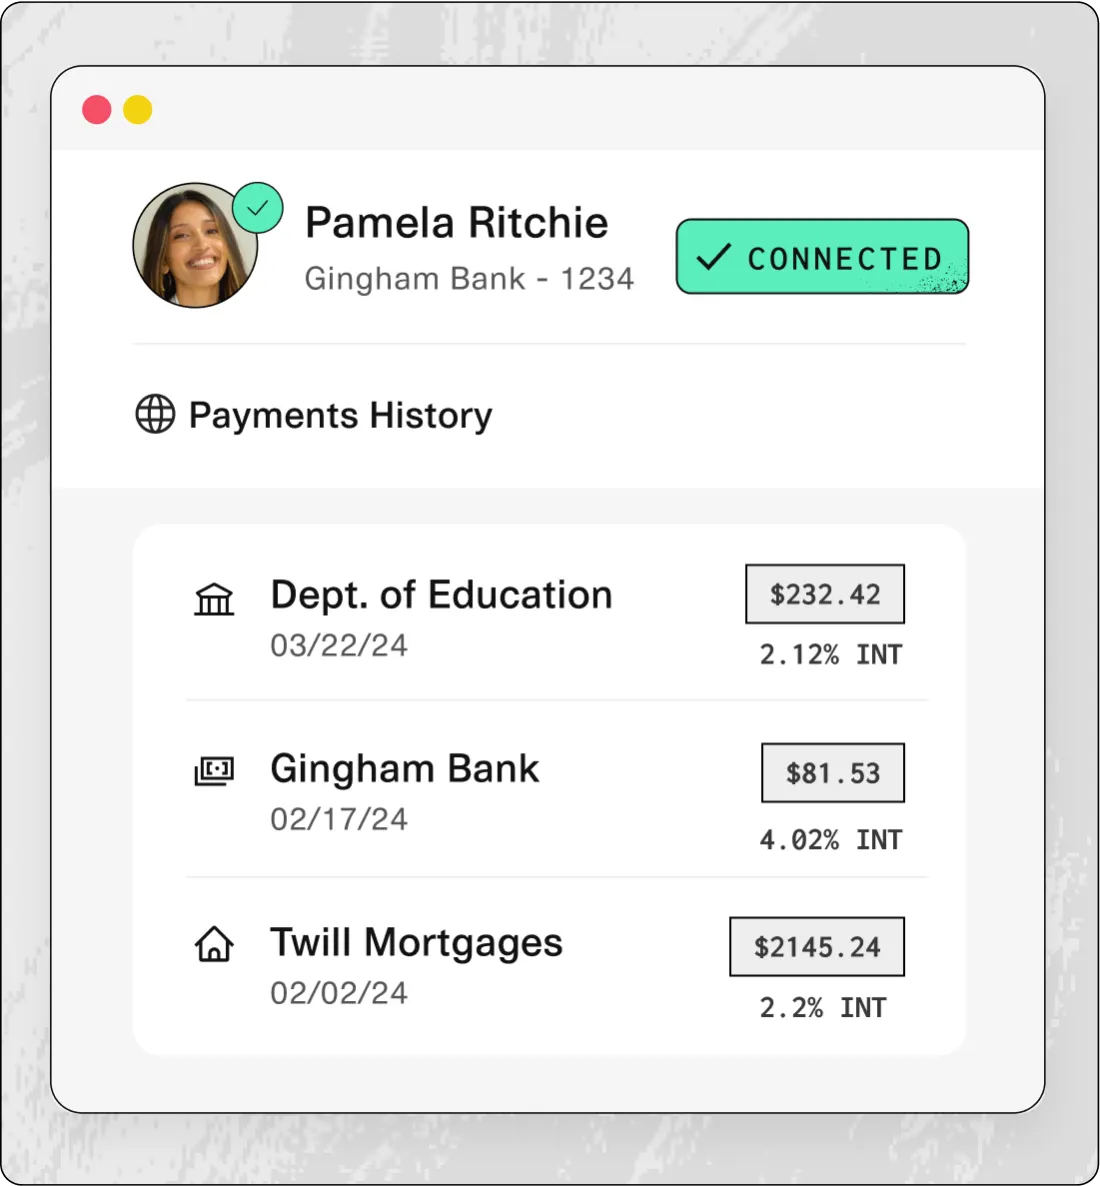 A graphic showing a payment history interface. At the top, there's a user profile for 'Pamela Ritchie' with a green checkmark indicating a connected status to Gingham Bank. Below, three payment records are shown: 'Dept. of Education' with a payment of $232.42 dated 03/22/24, 'Gingham Bank' with a payment of $81.53 dated 02/17/24, and 'Twill Mortgages' with a payment of $2145.24 dated 02/02/24. Interest rates are displayed next to each amount.